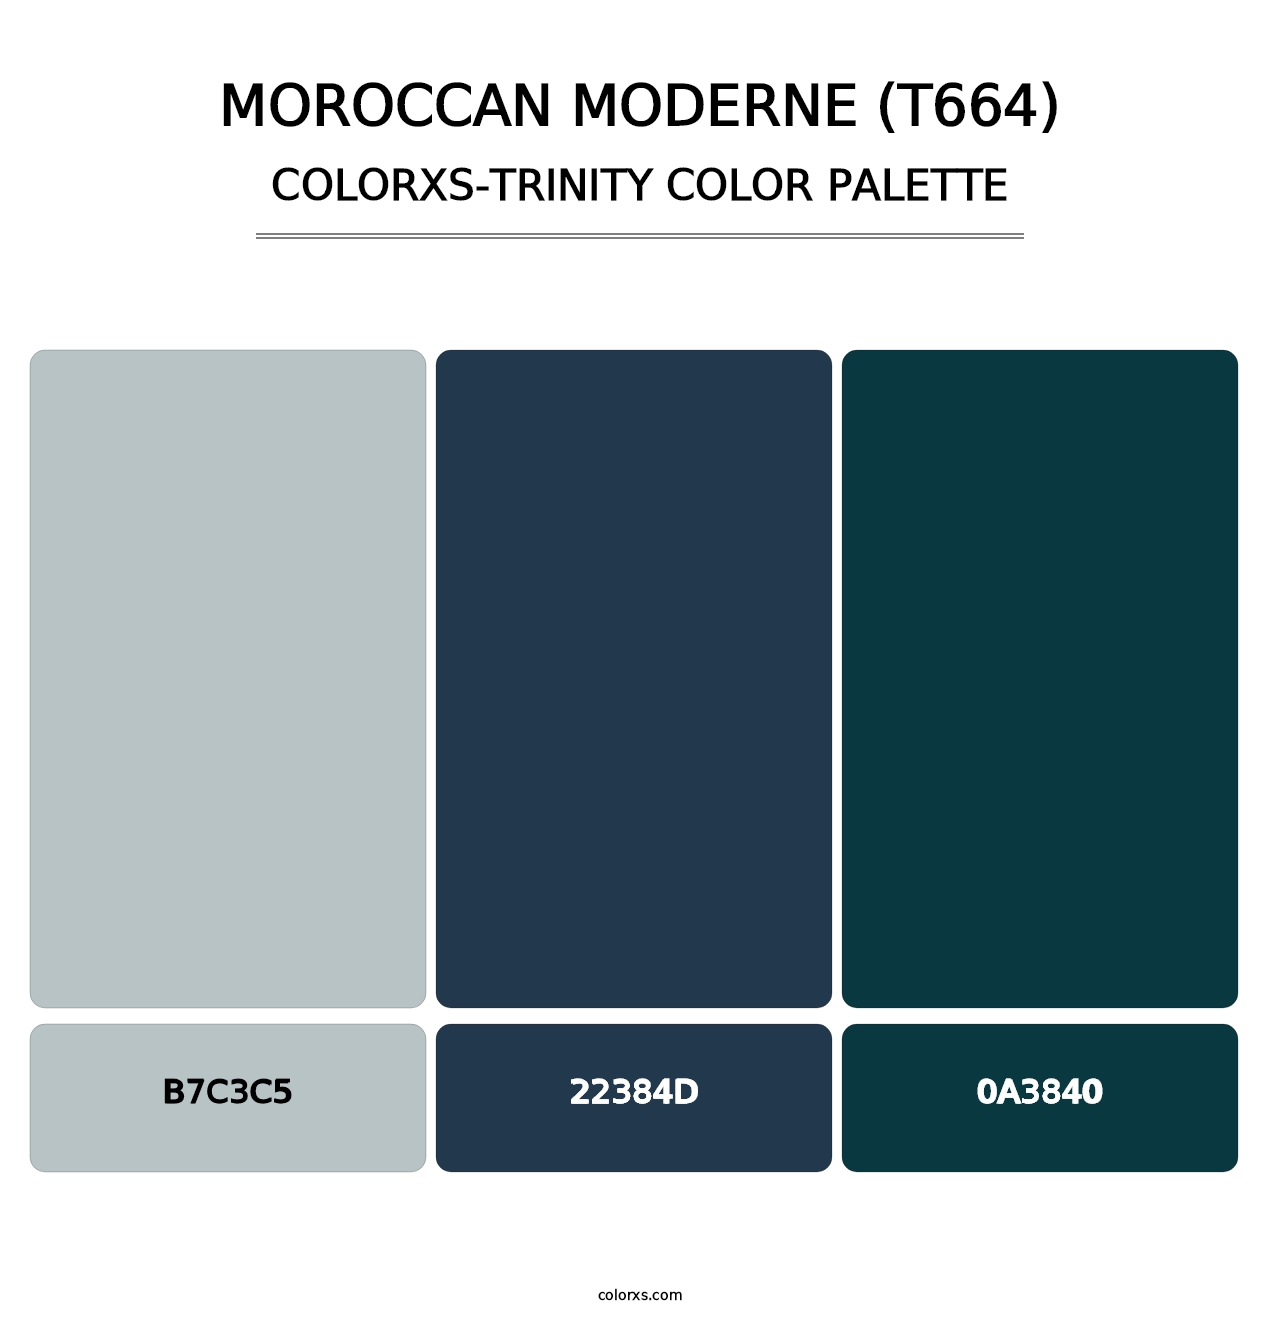 Moroccan Moderne (T664) - Colorxs Trinity Palette